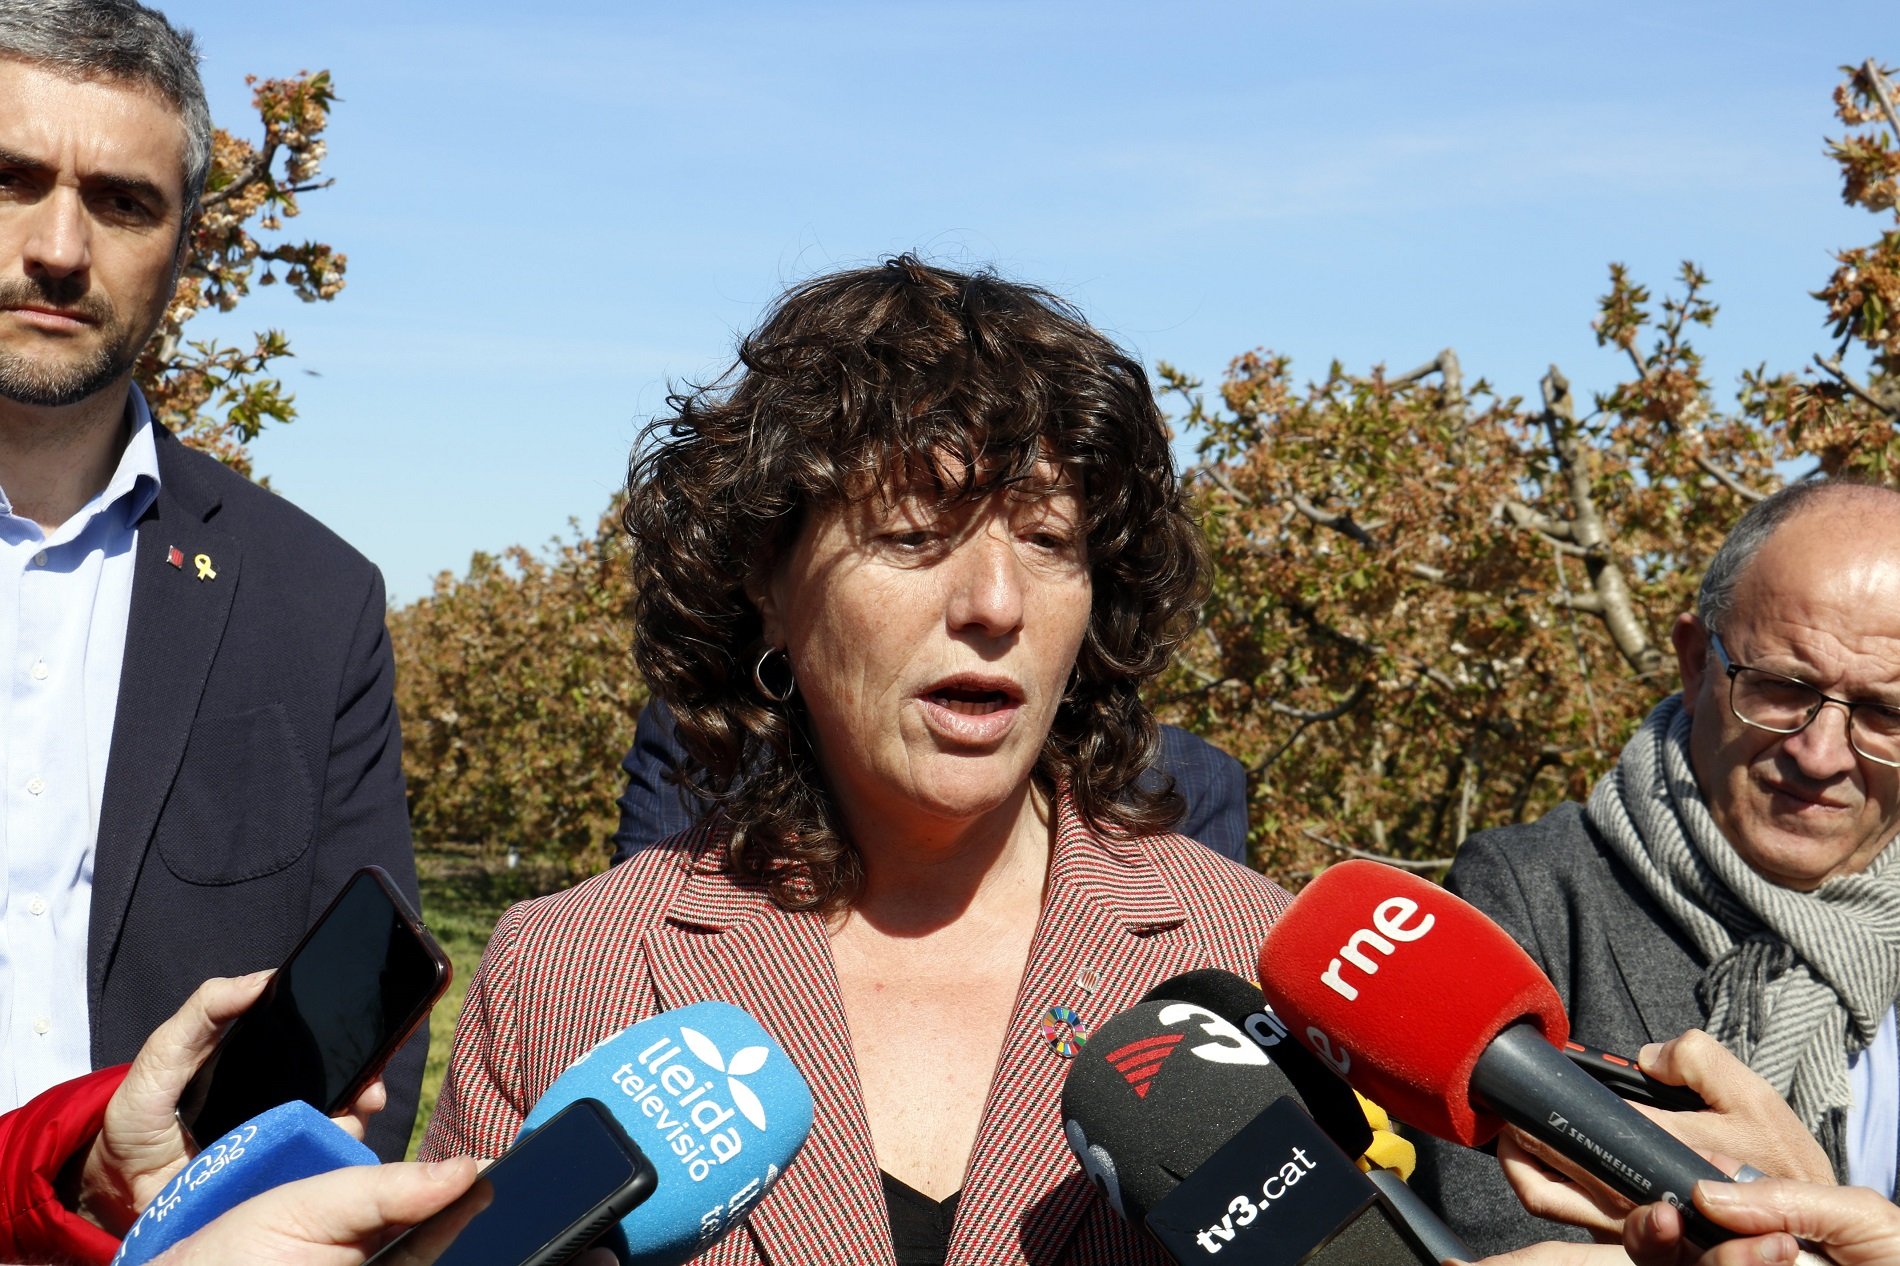 Catalan climate minister proposes water restrictions for hotels due to drought